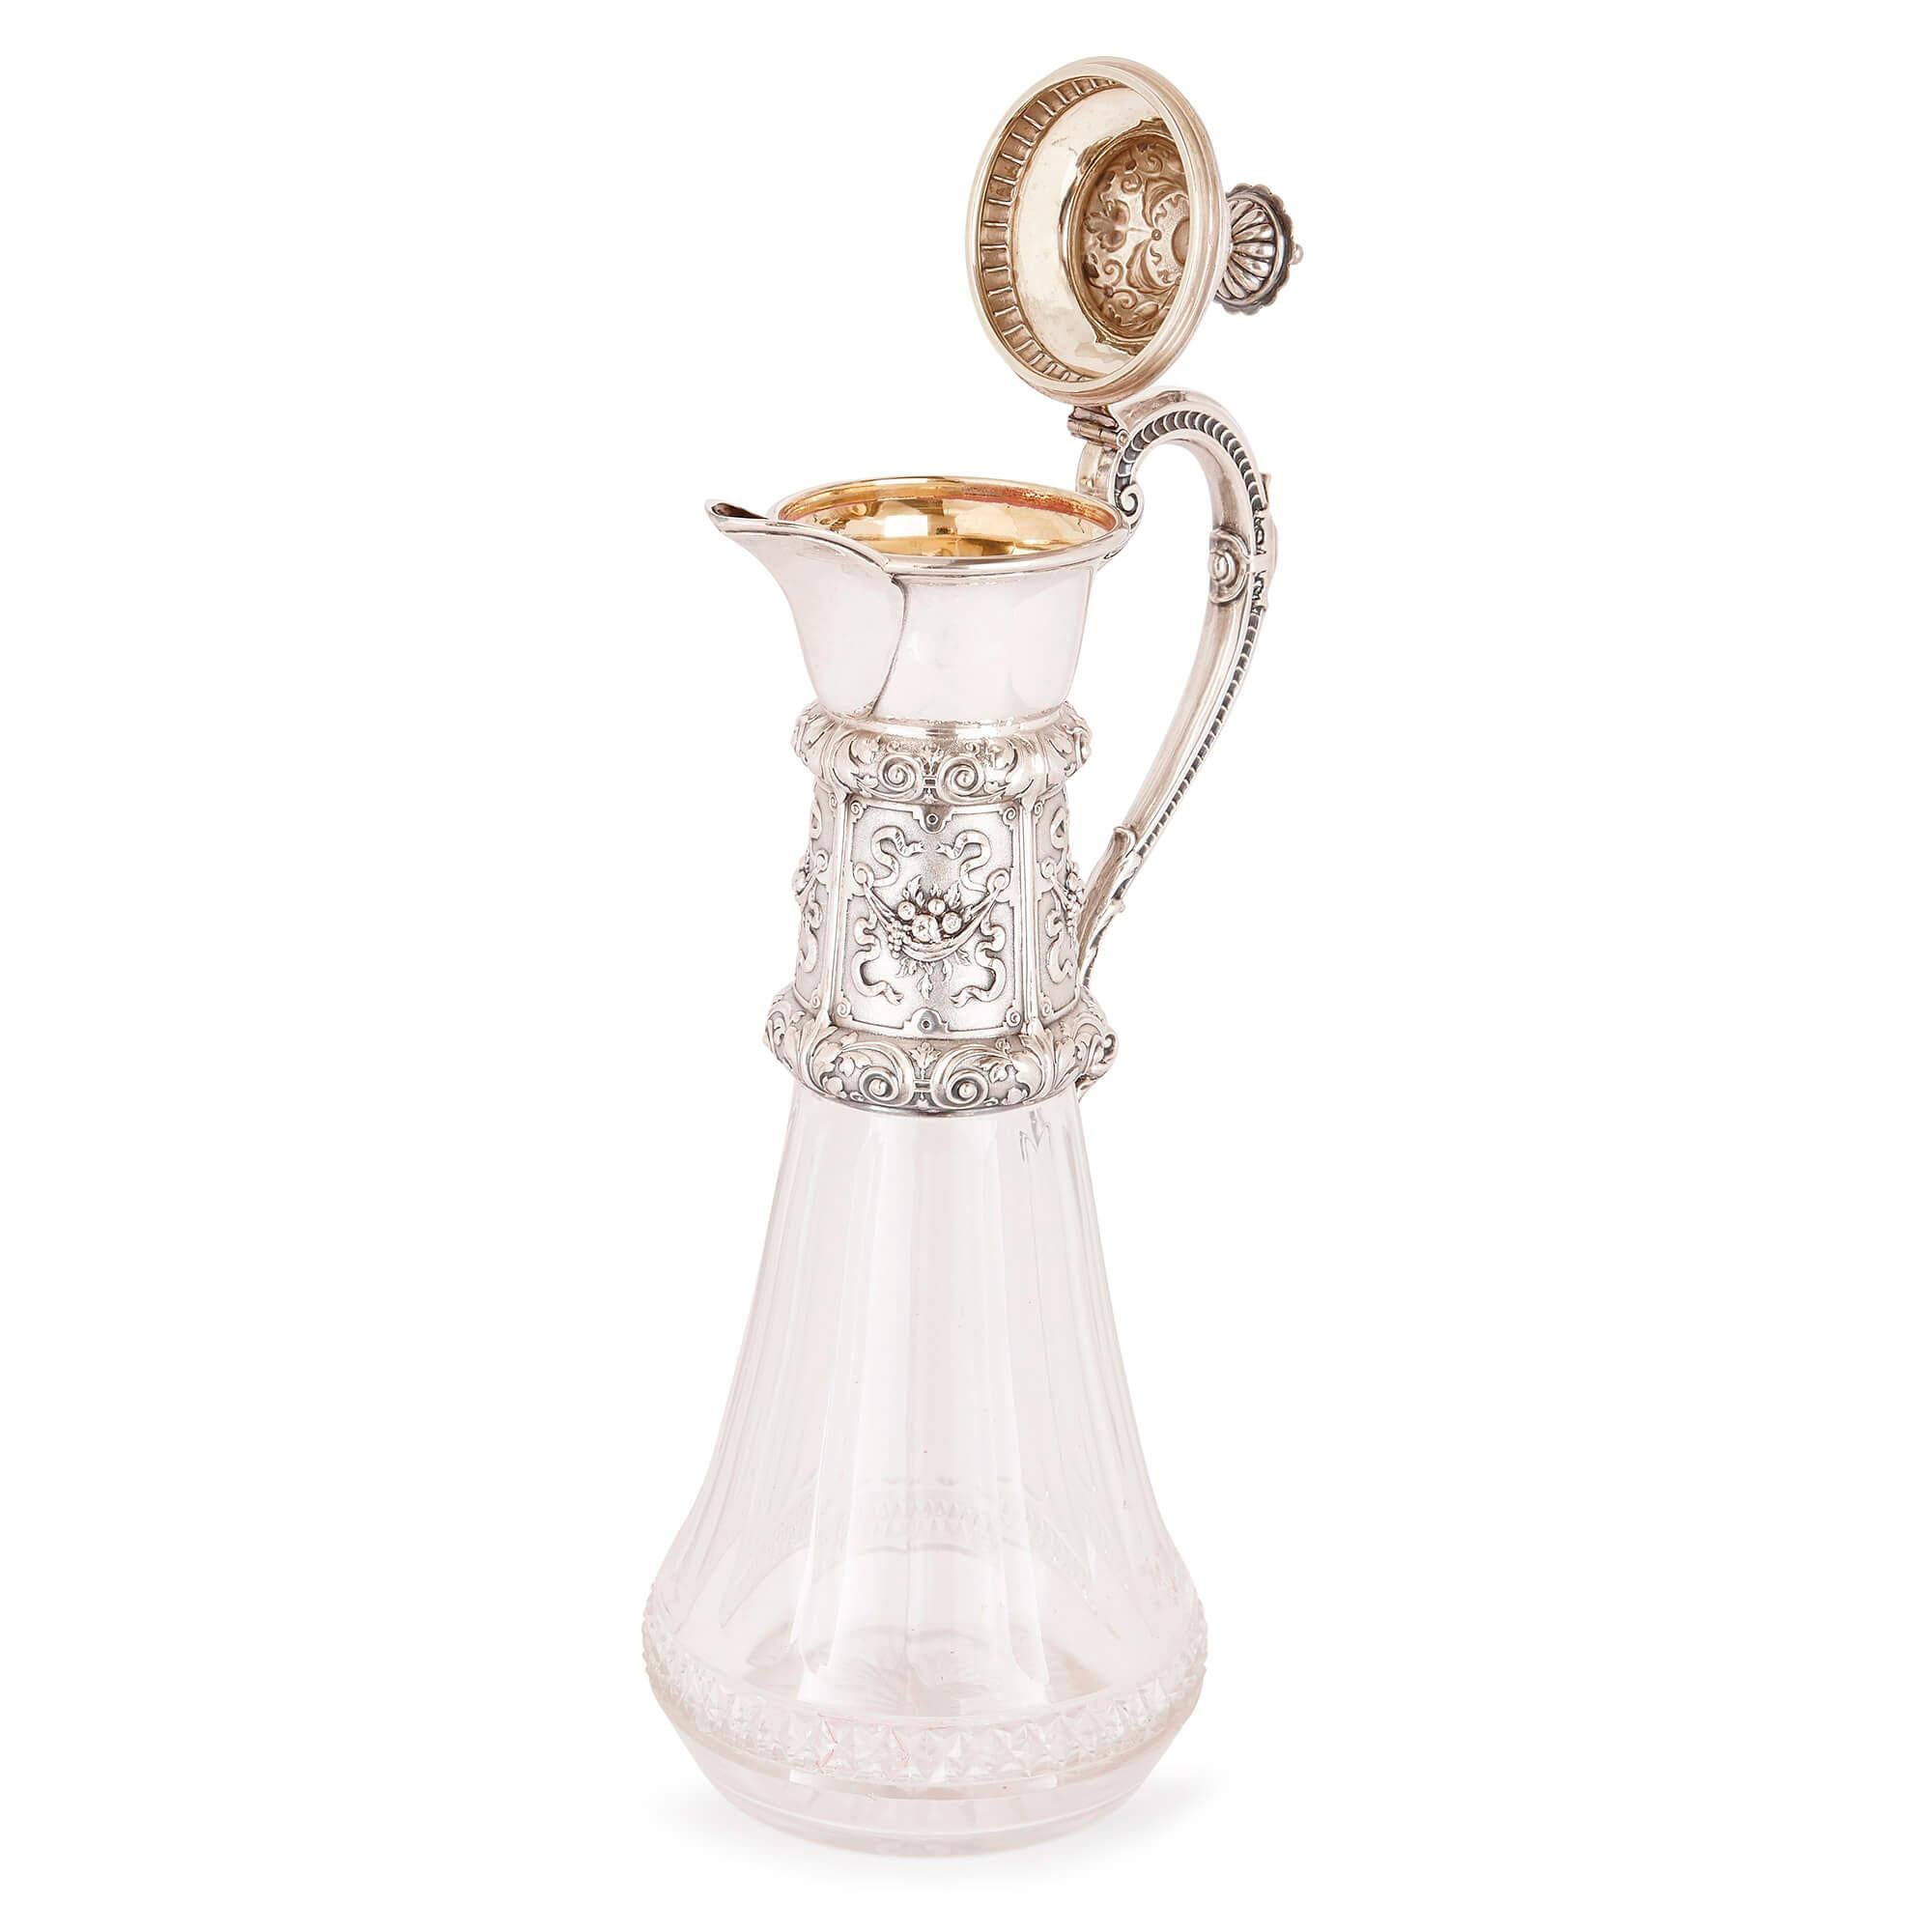 These exquisite jugs have been expertly crafted in glass and are mounted with sterling silver necks, spouts, handles and lids. 

The broadest part of the glass base, just above the bottom of each jug, is articulated by a decorative band, where the